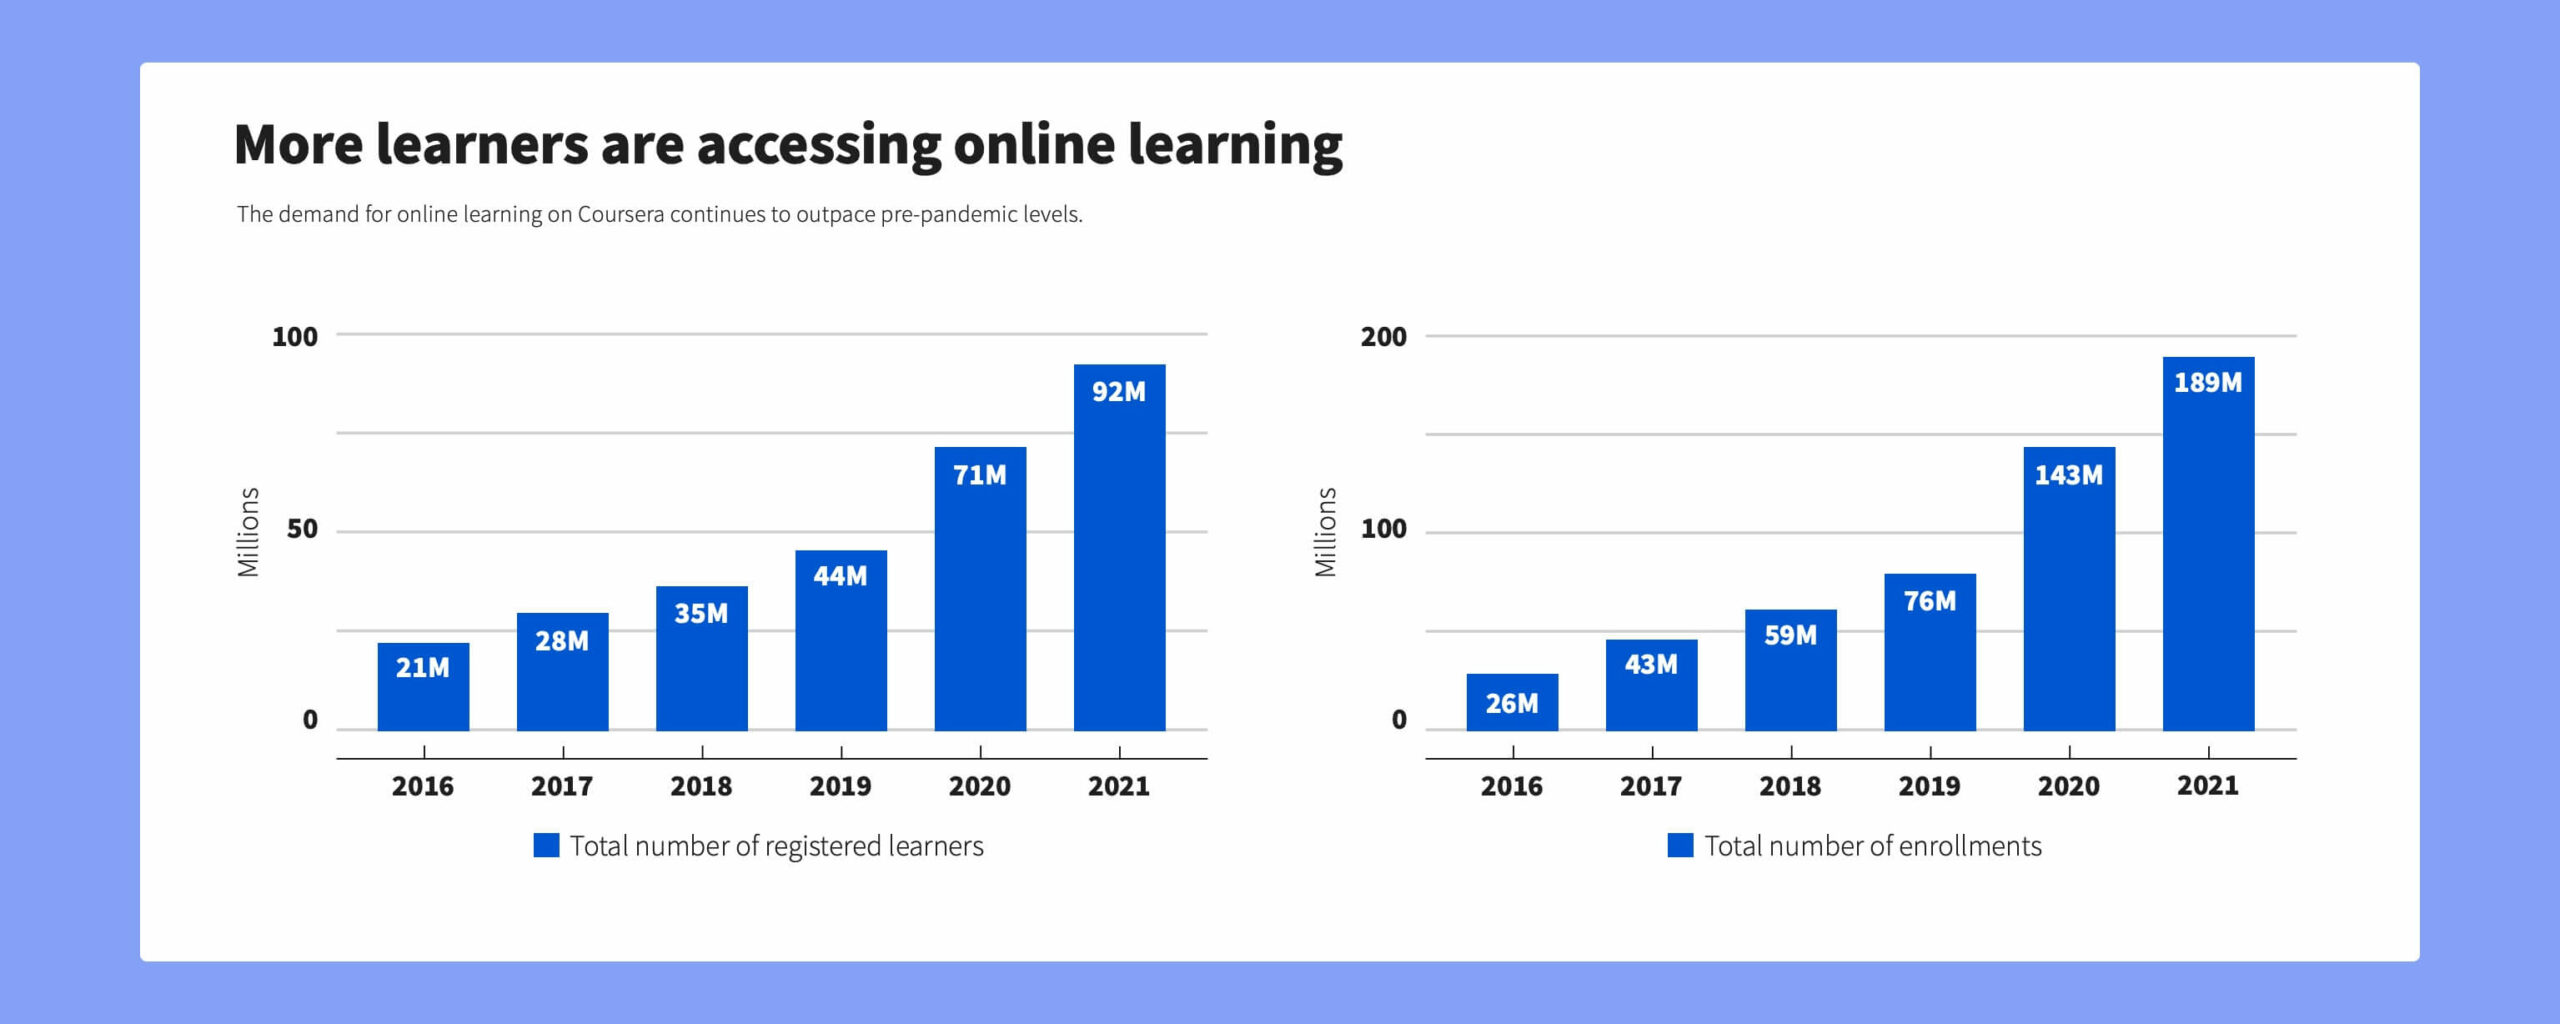 Number of registered users for online learning on Coursera